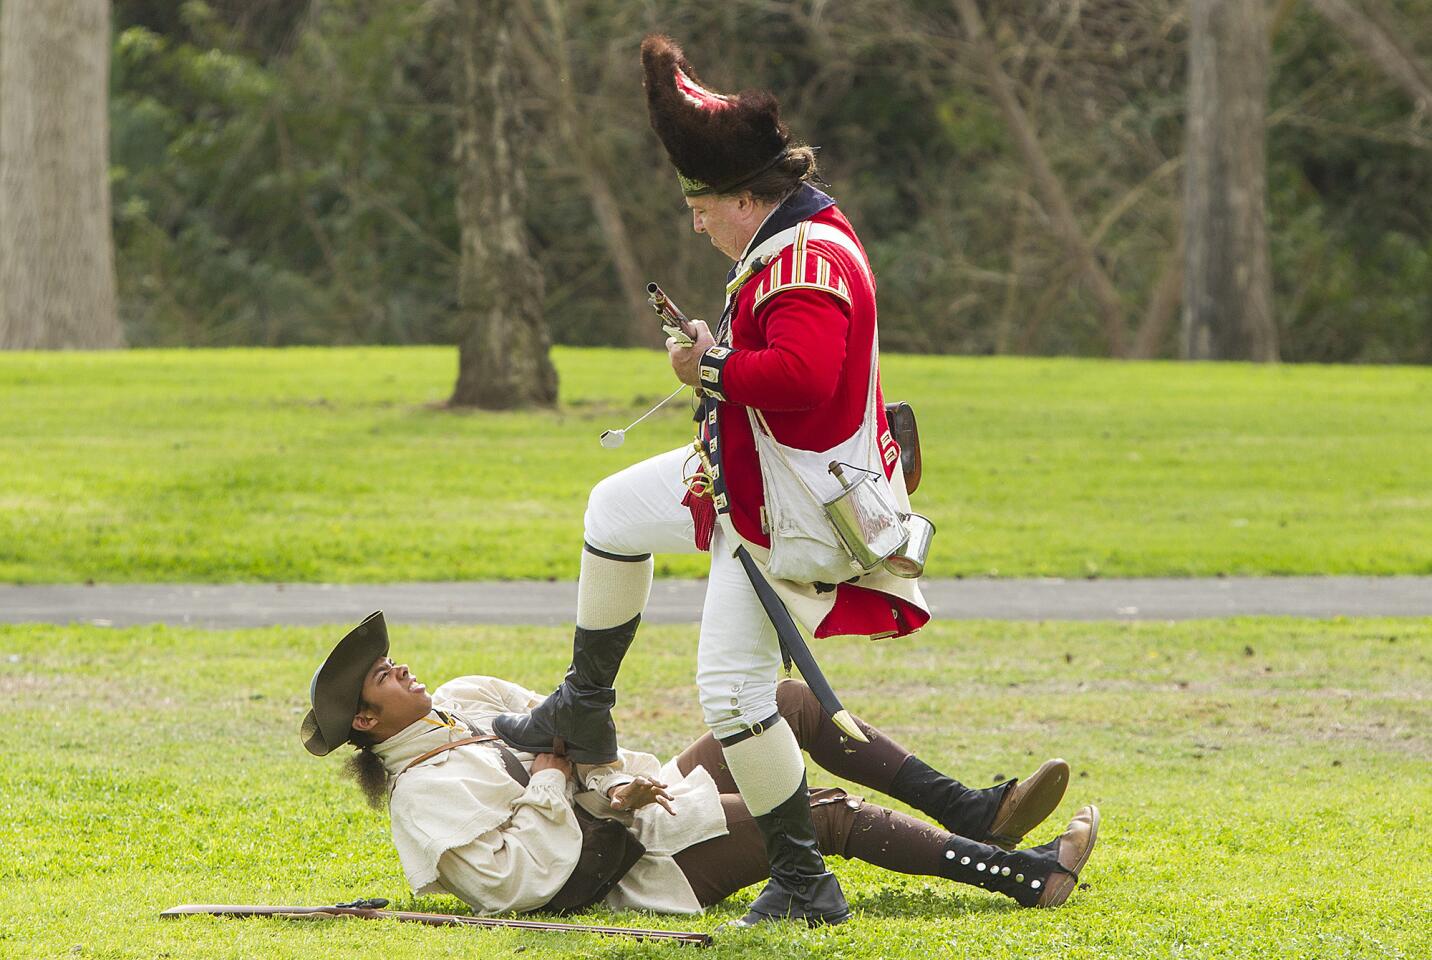 A British soldier steps on a wounded militiamen during a reenactment of the Battle of Lexington and Parkers Revenge at the Huntington Beach Central Park on Saturday, February 10.